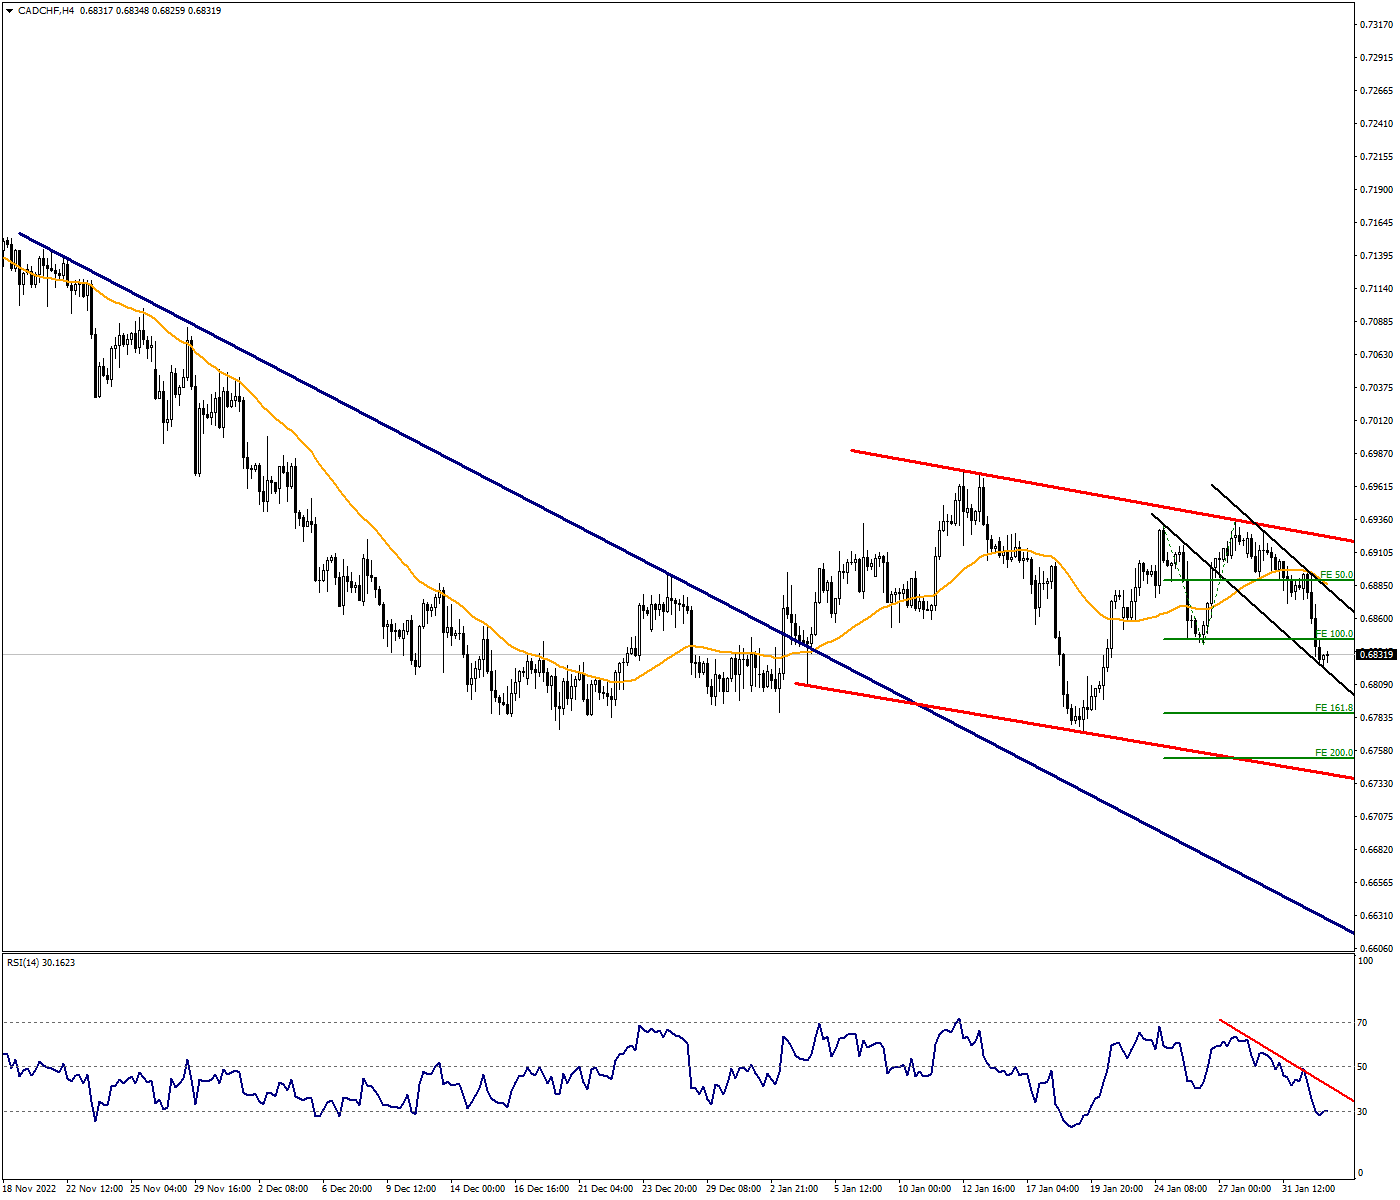 CADCHF Could Drop To a 3-Year Low